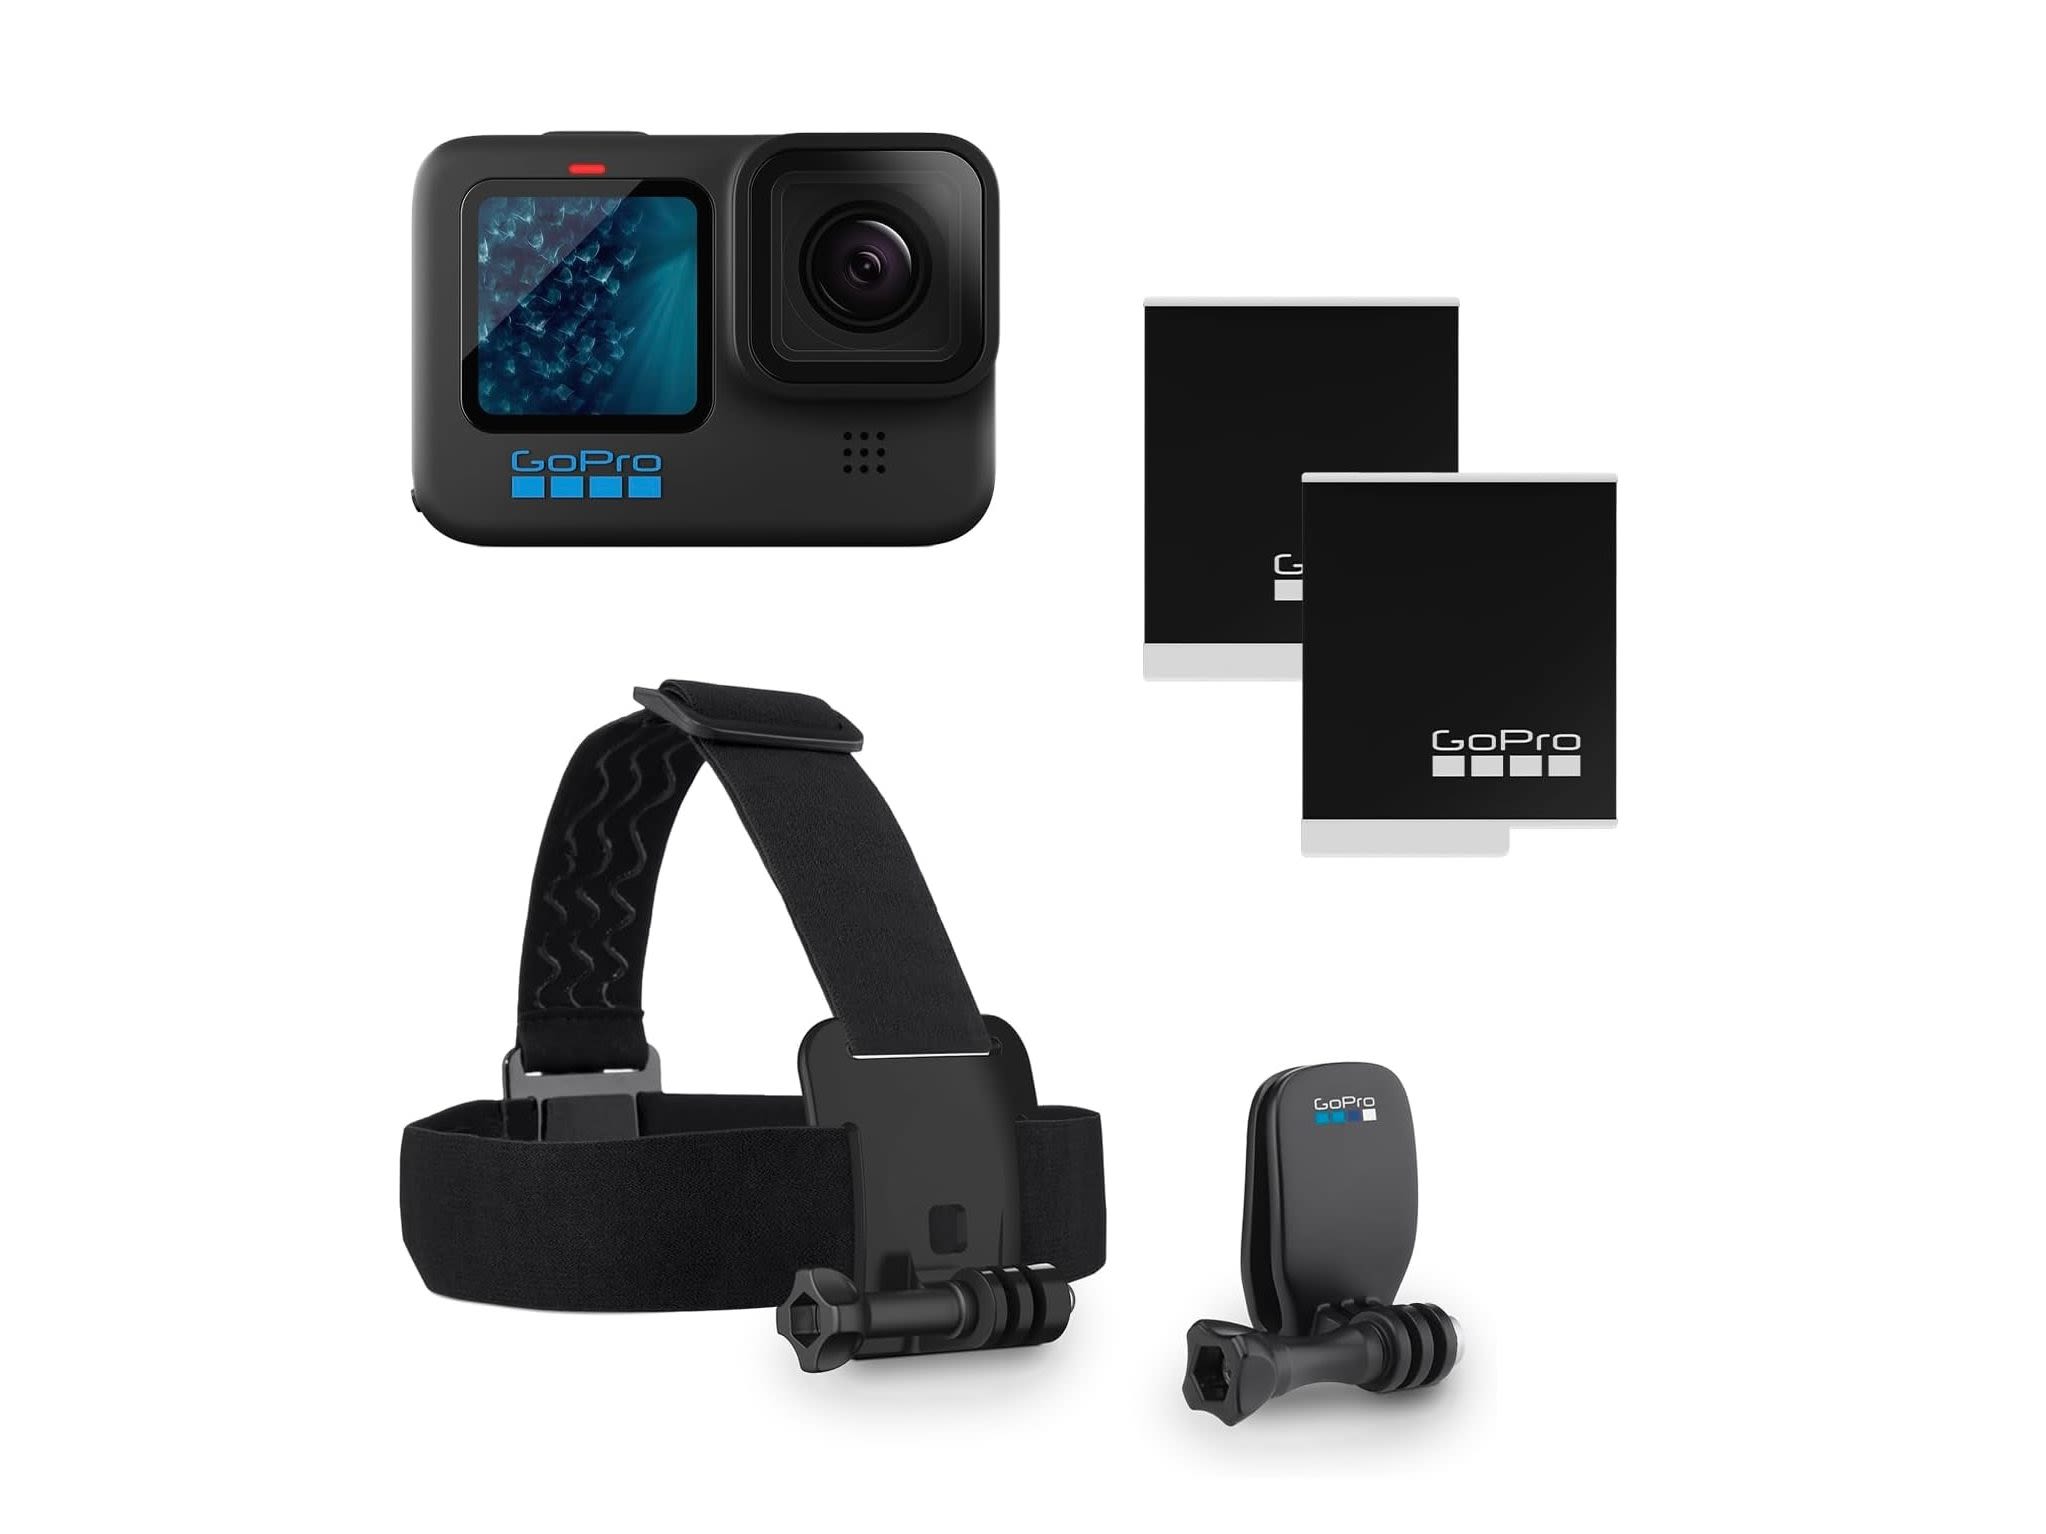 This GoPro bundle is only $250 and includes awesome accessories